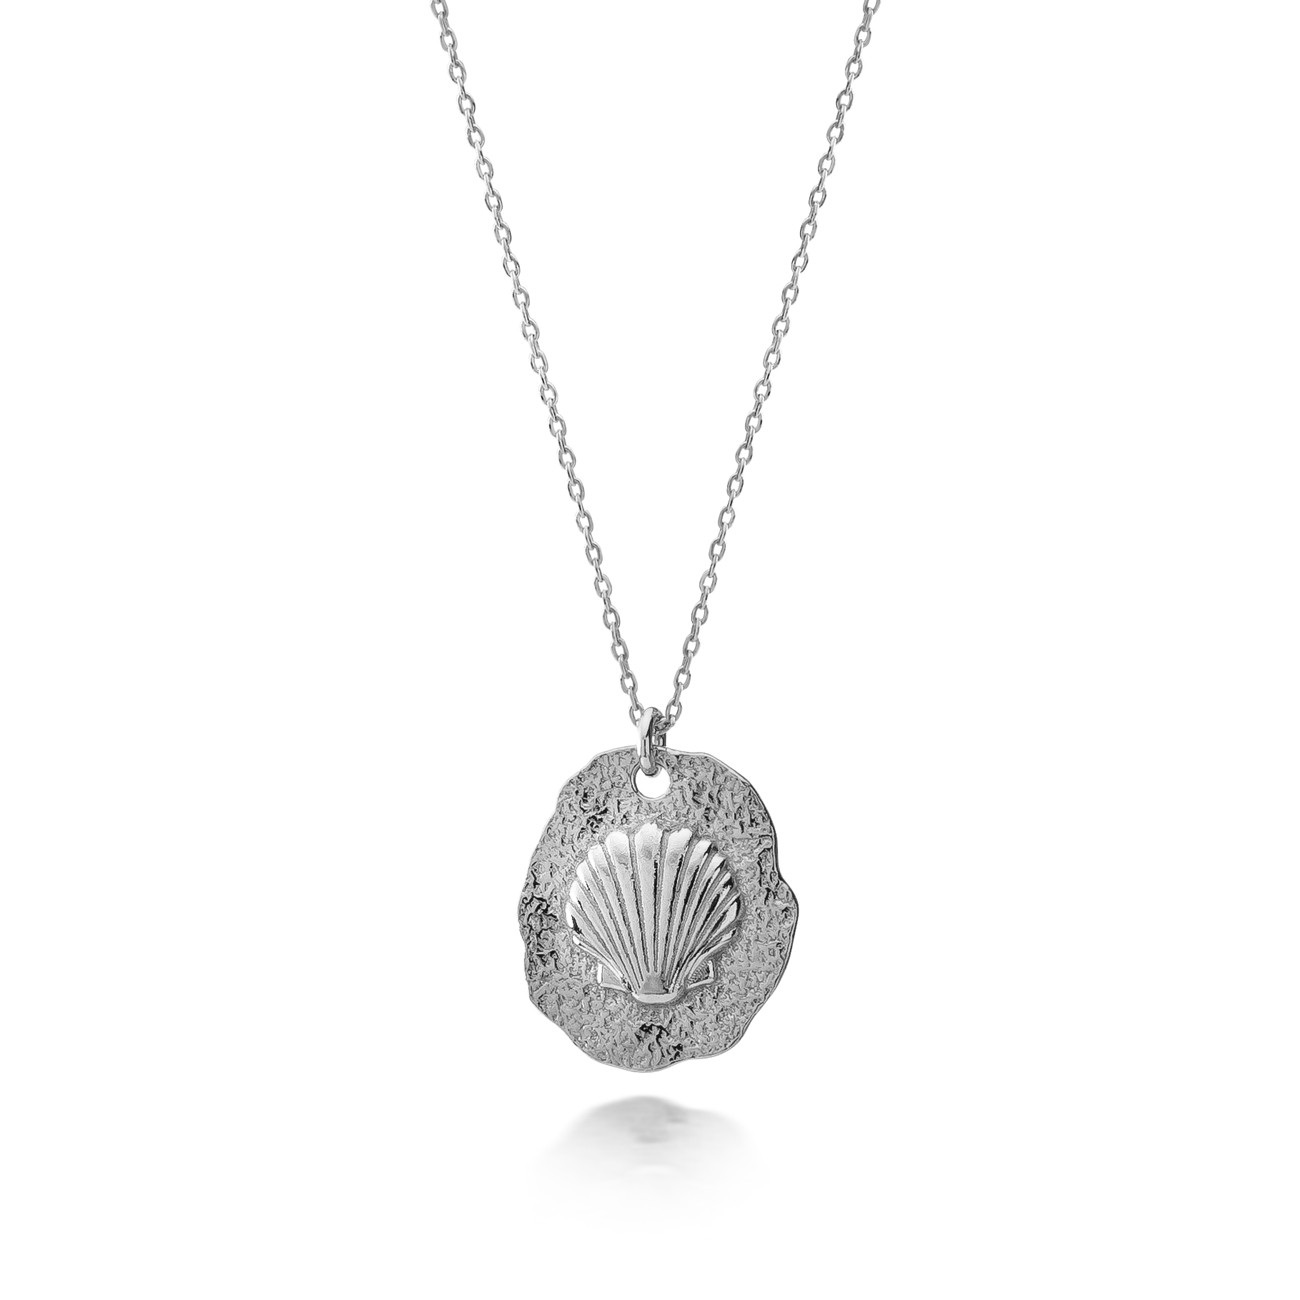 Silver shell necklace, AUGUSTYNKA x GIORRE